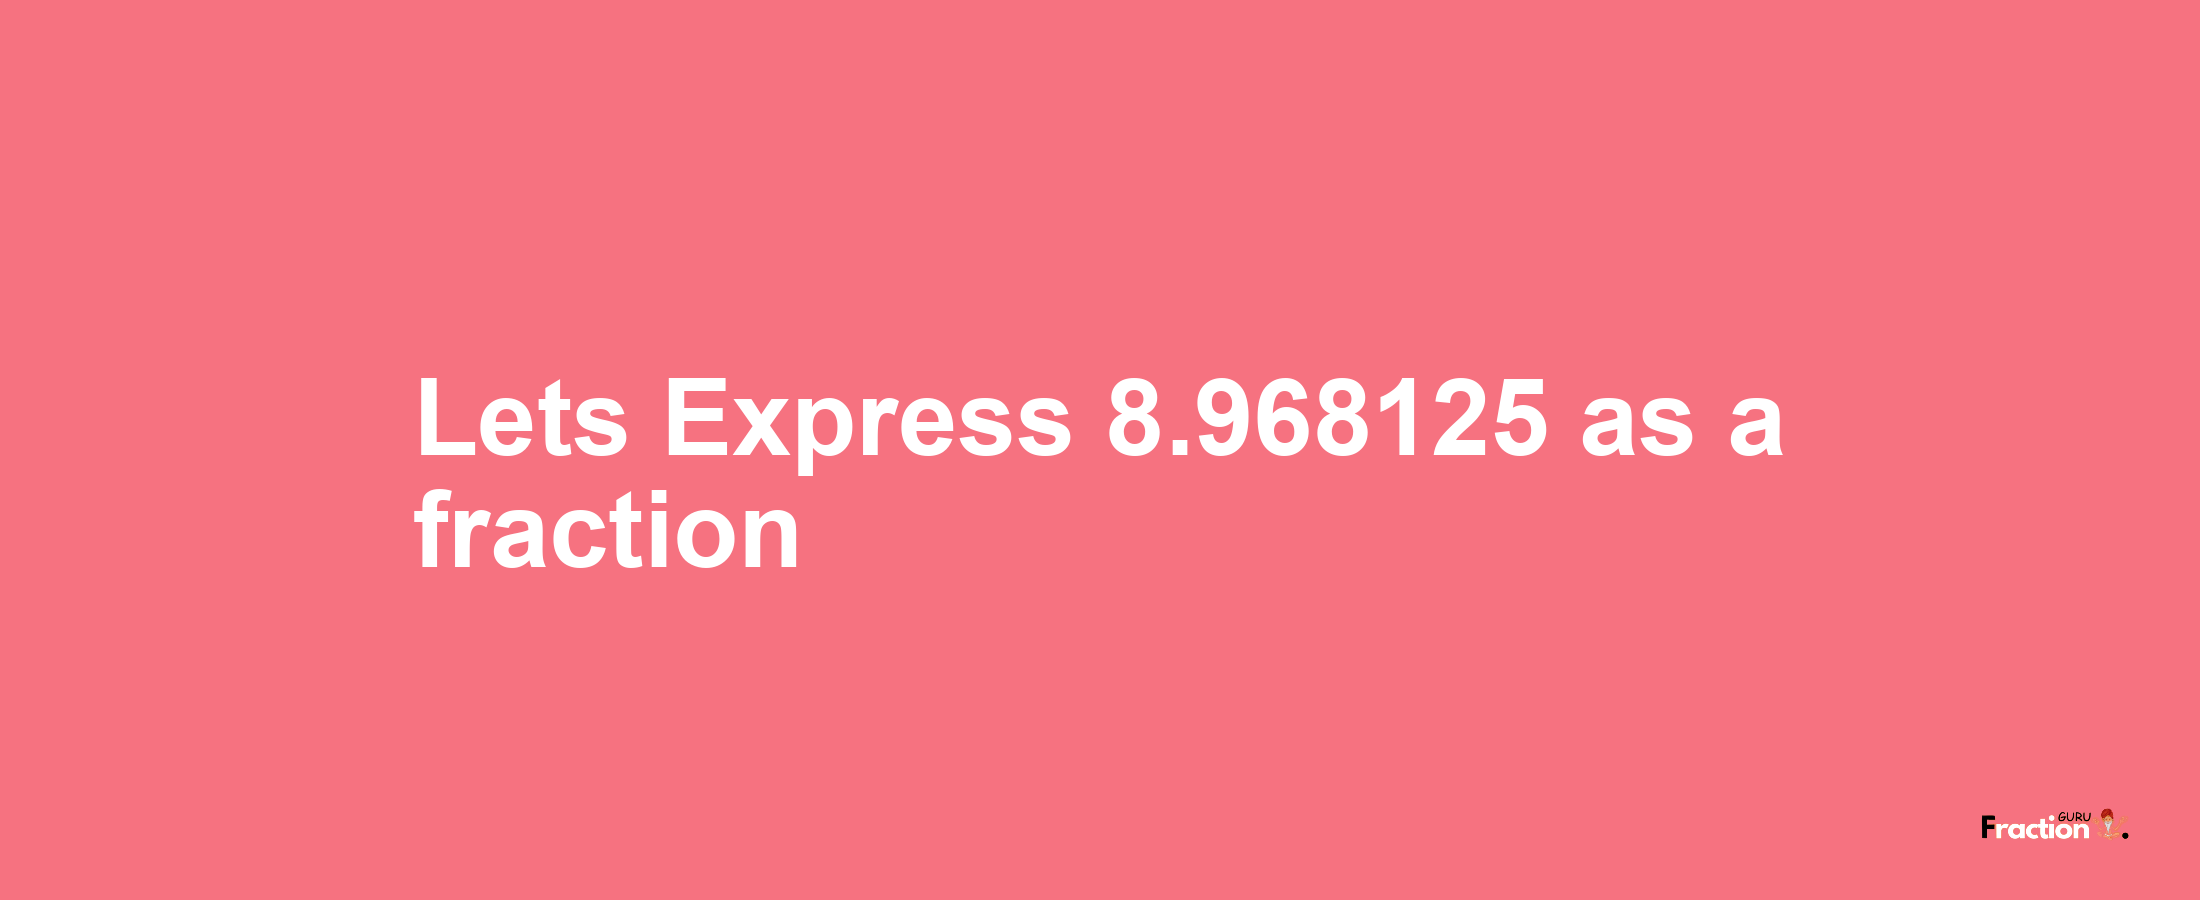 Lets Express 8.968125 as afraction